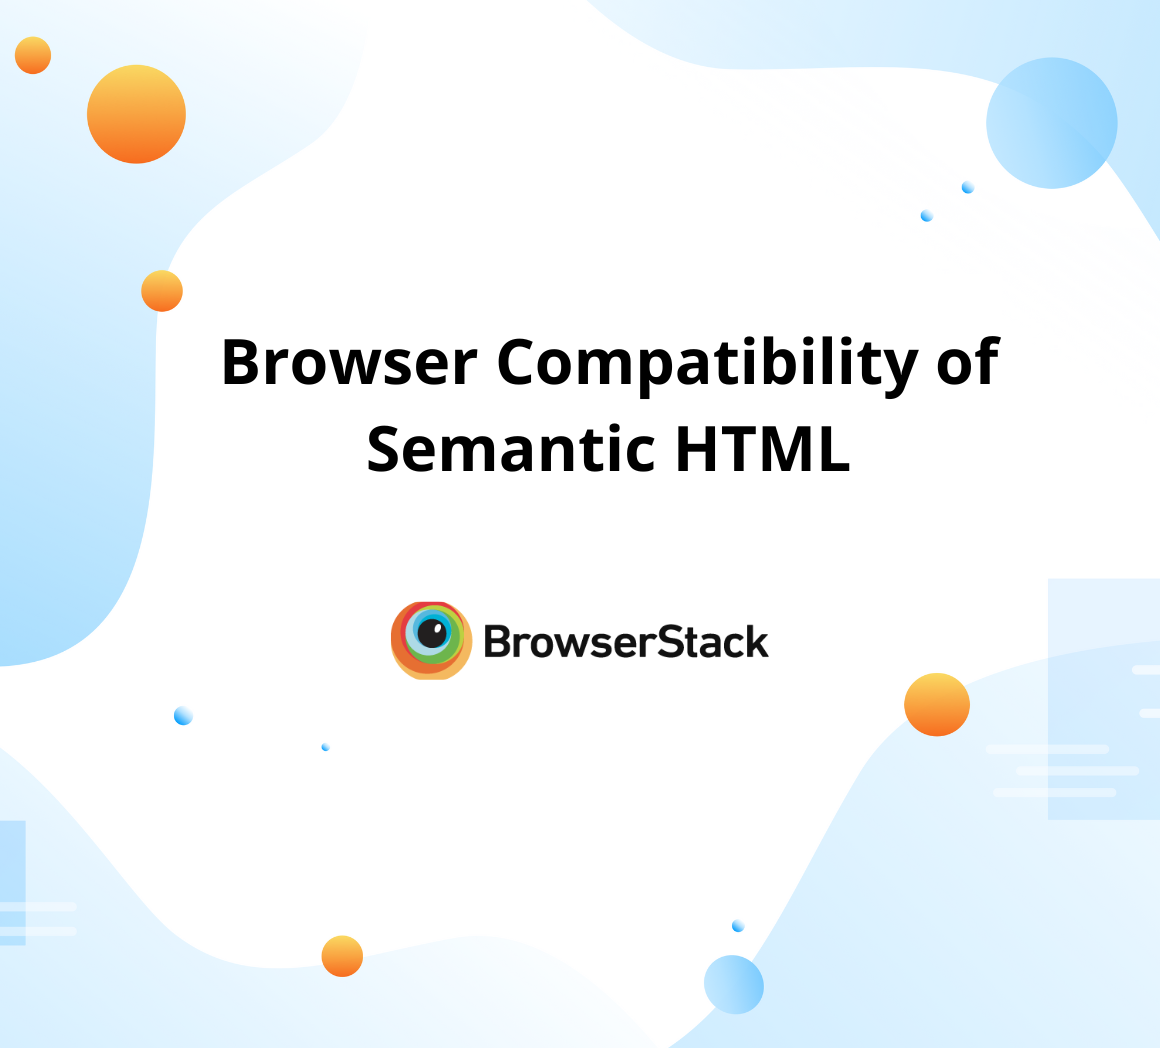 Browser Compatibility of Semantic HTML